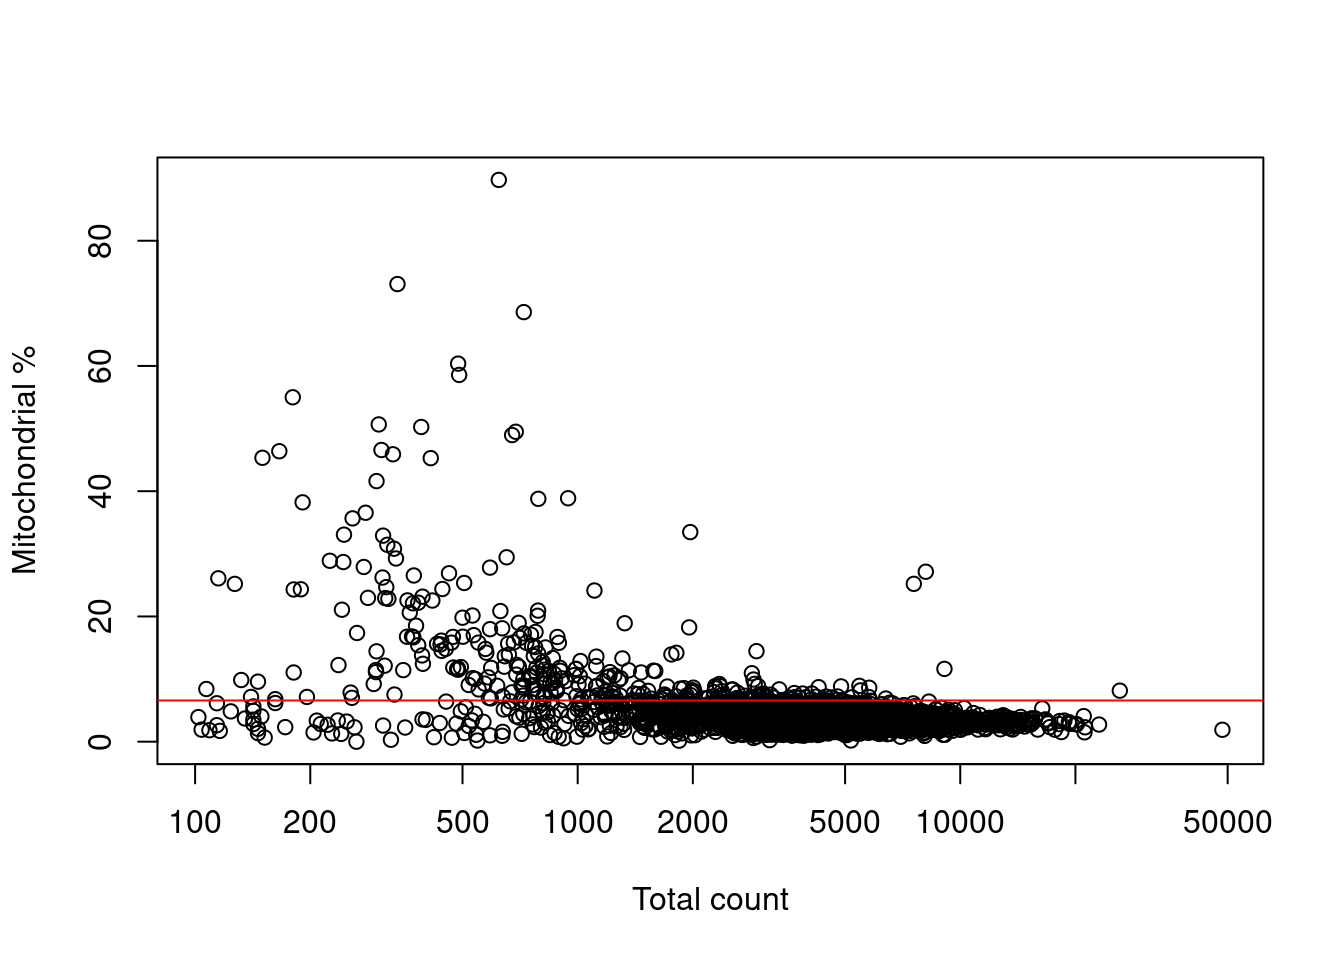 Percentage of reads assigned to mitochondrial transcripts, plotted against the library size. The red line represents the upper threshold used for QC filtering.